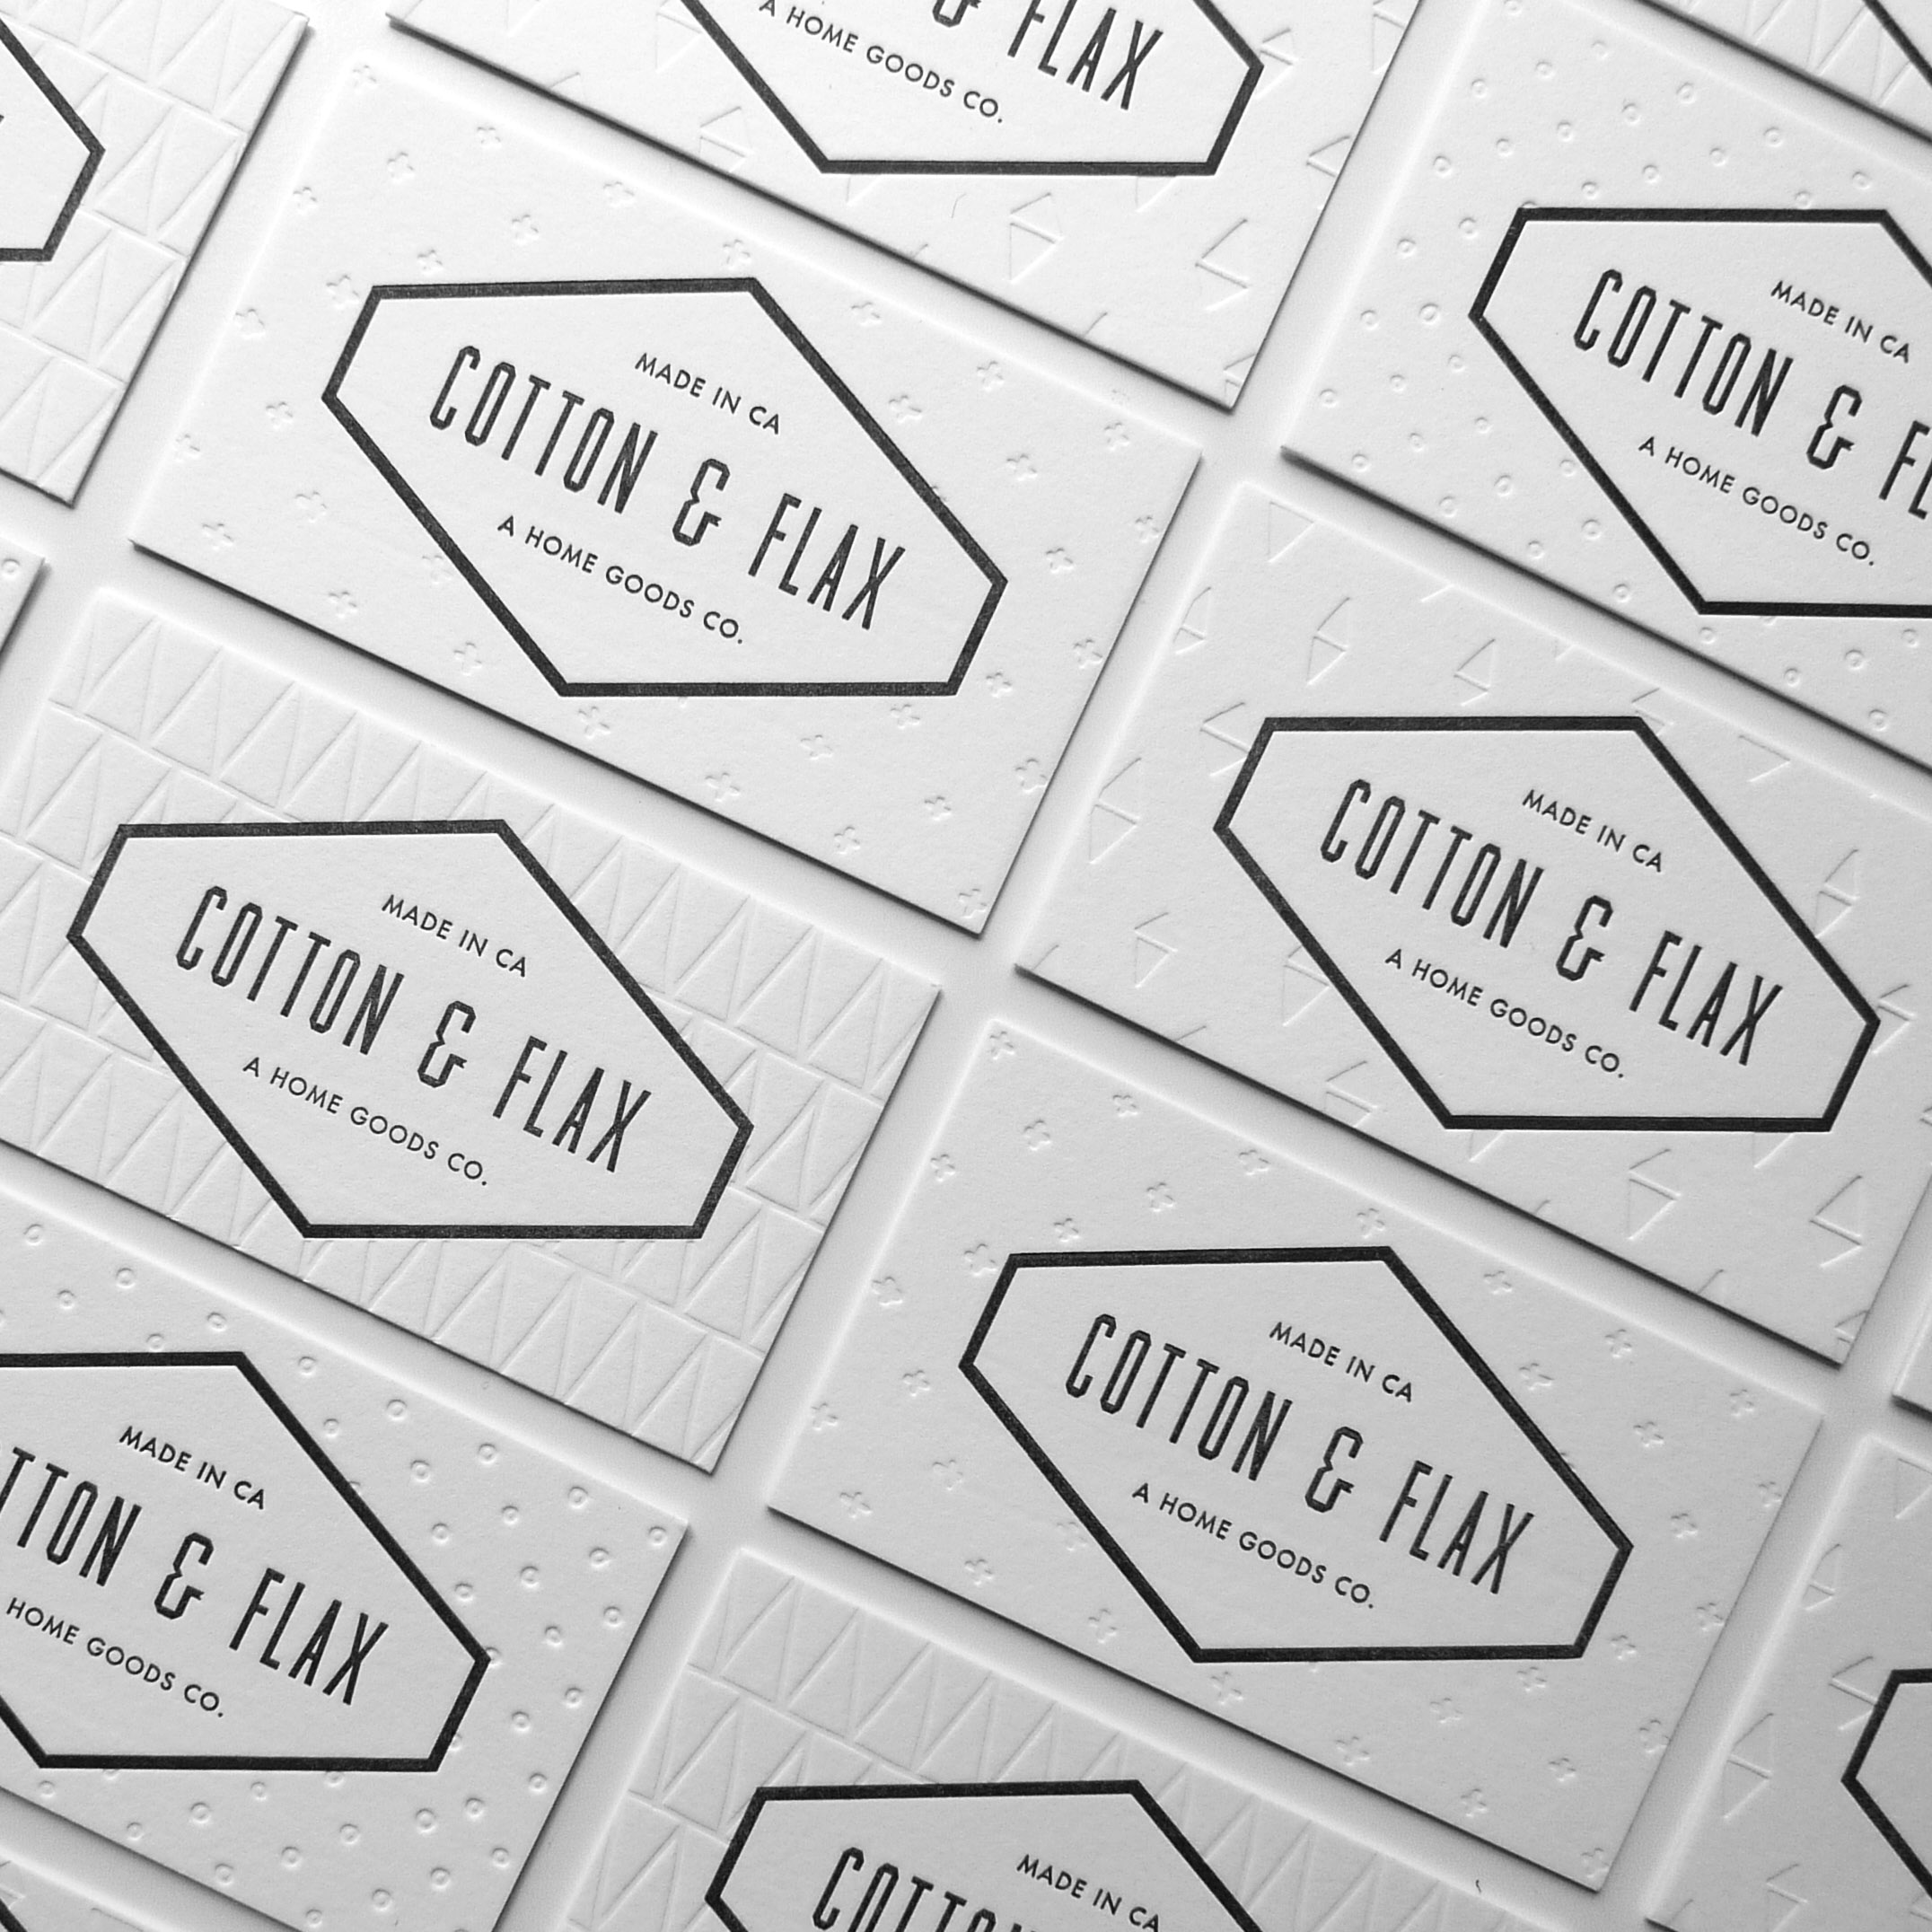 Cotton & Flax business cards